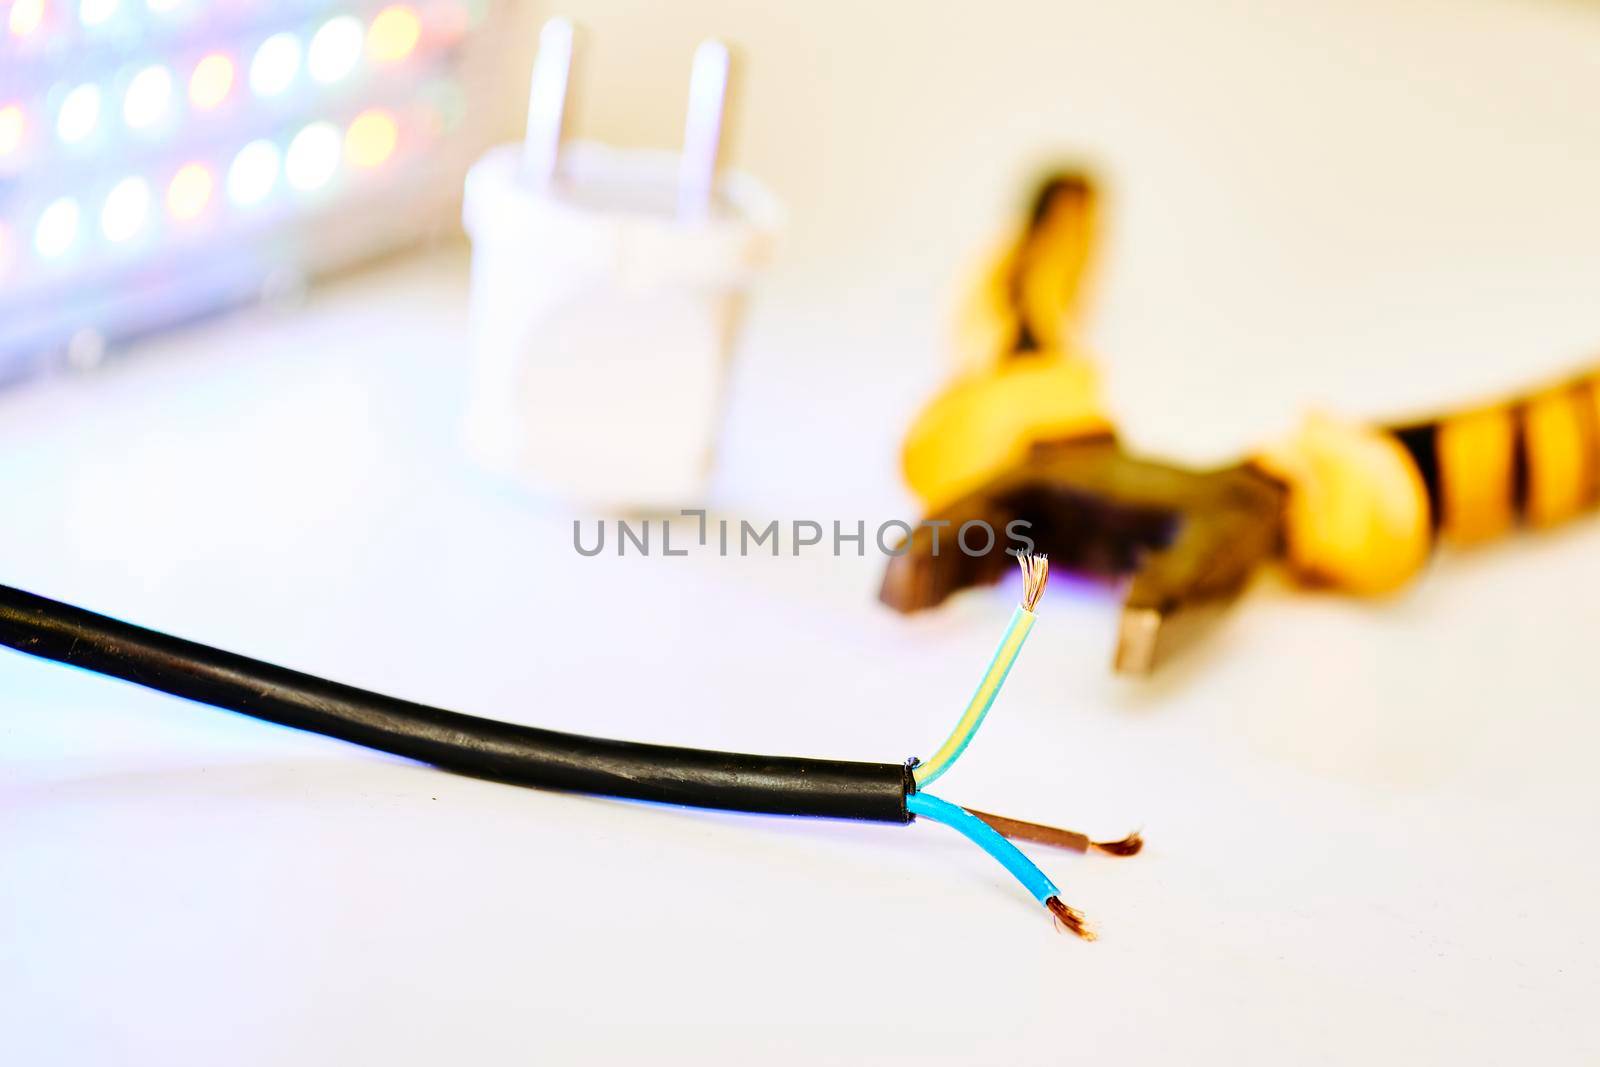 Electrical equipment for connection.Three-core electric cable, metalwork pliers and LED lamp